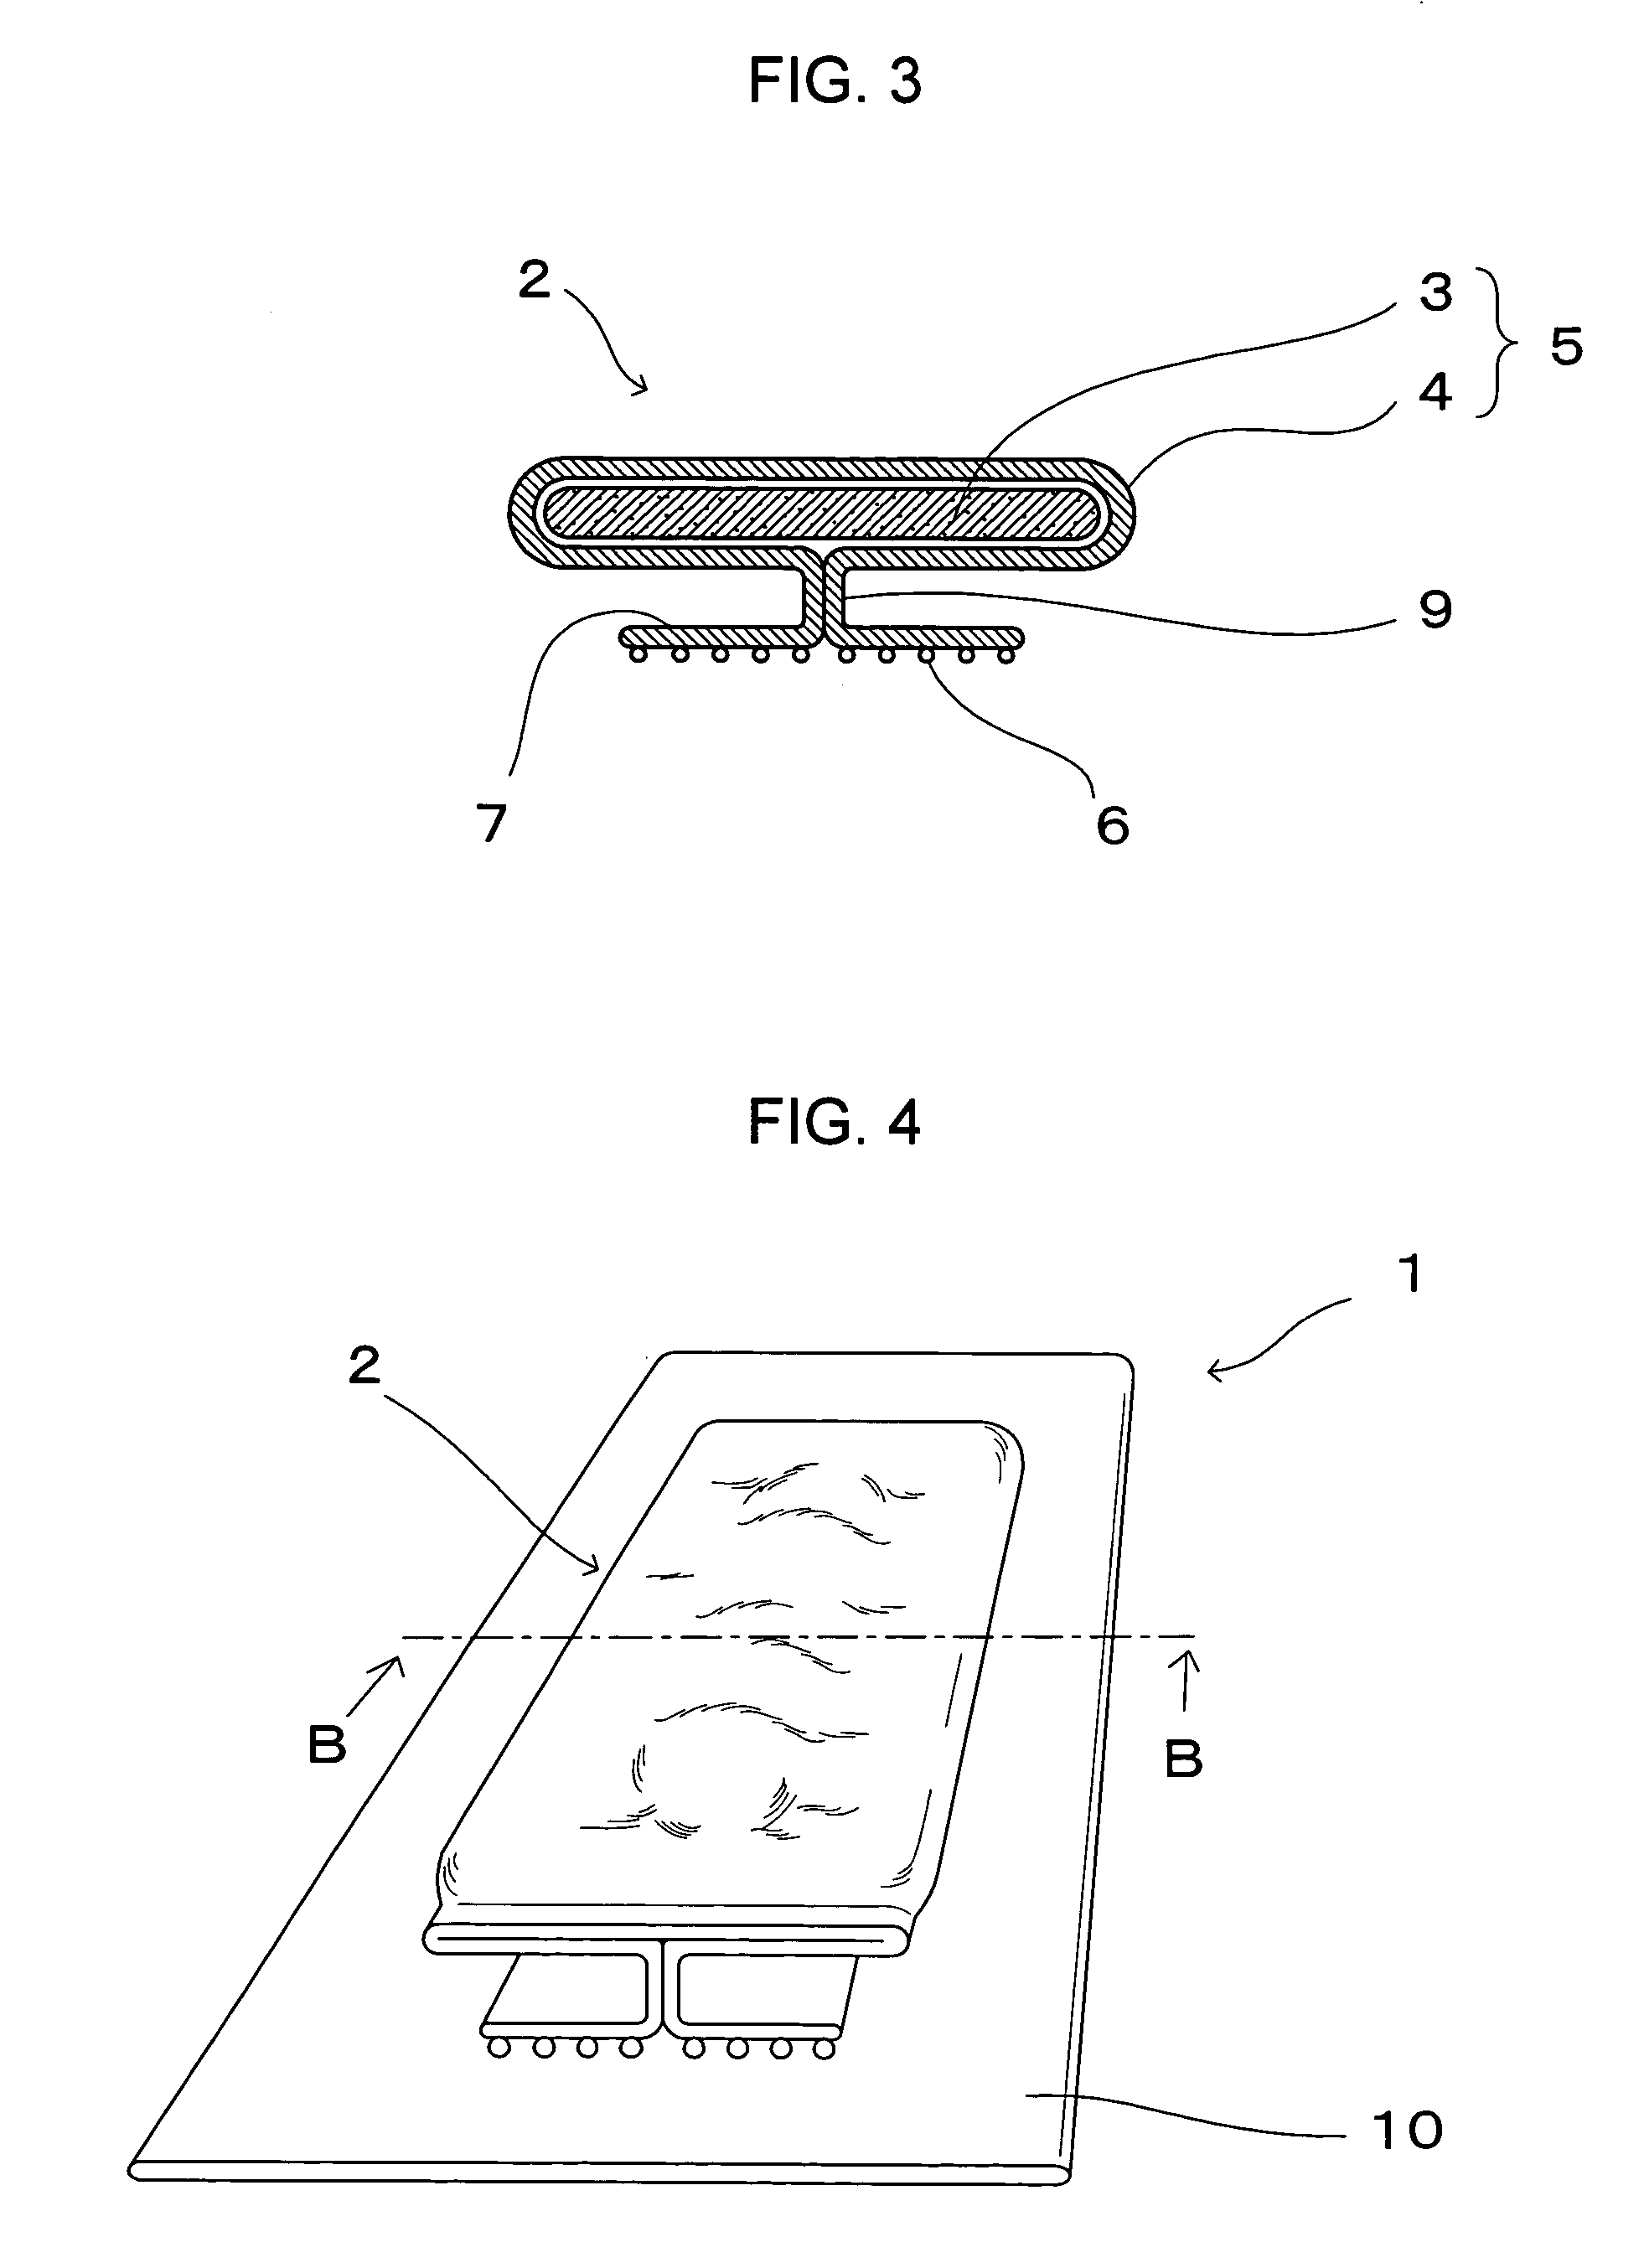 Auxiliary pad for mounting absorbable article